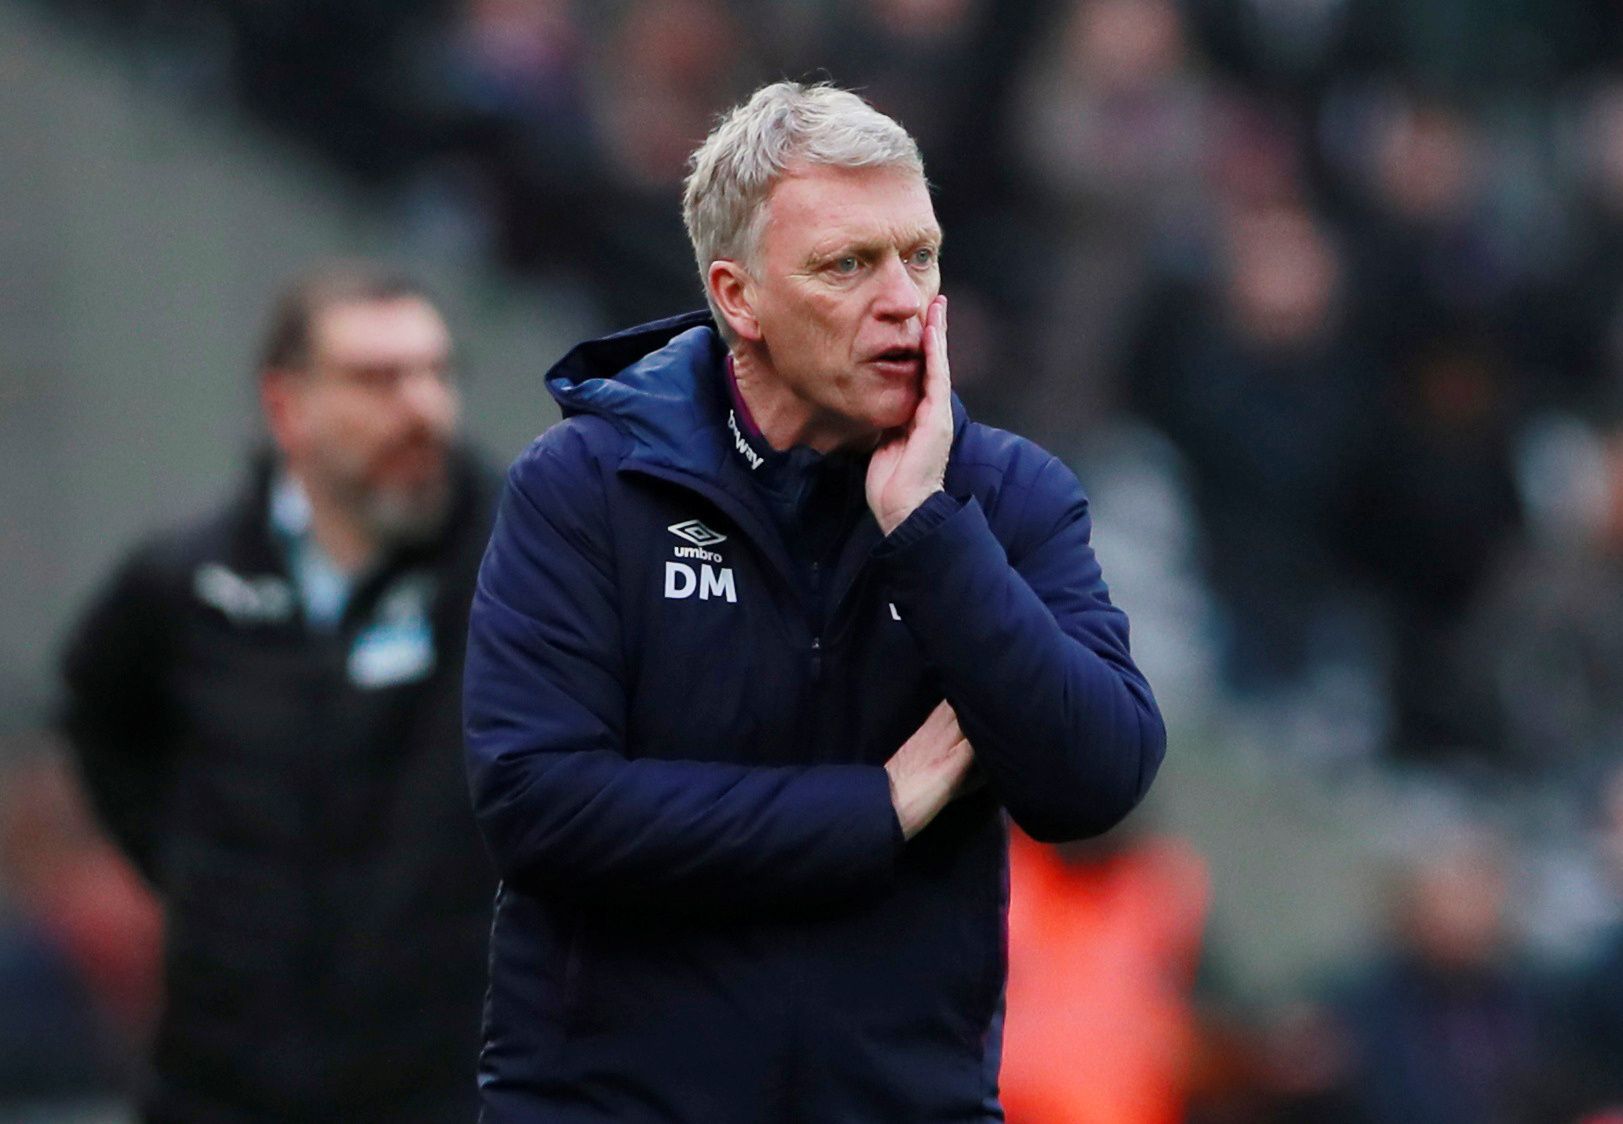 Soccer Football - FA Cup Fourth Round - West Ham United v West Bromwich Albion - London Stadium, London, Britain - January 25, 2020  West Ham United manager David Moyes        Action Images via Reuters/Andrew Couldridge